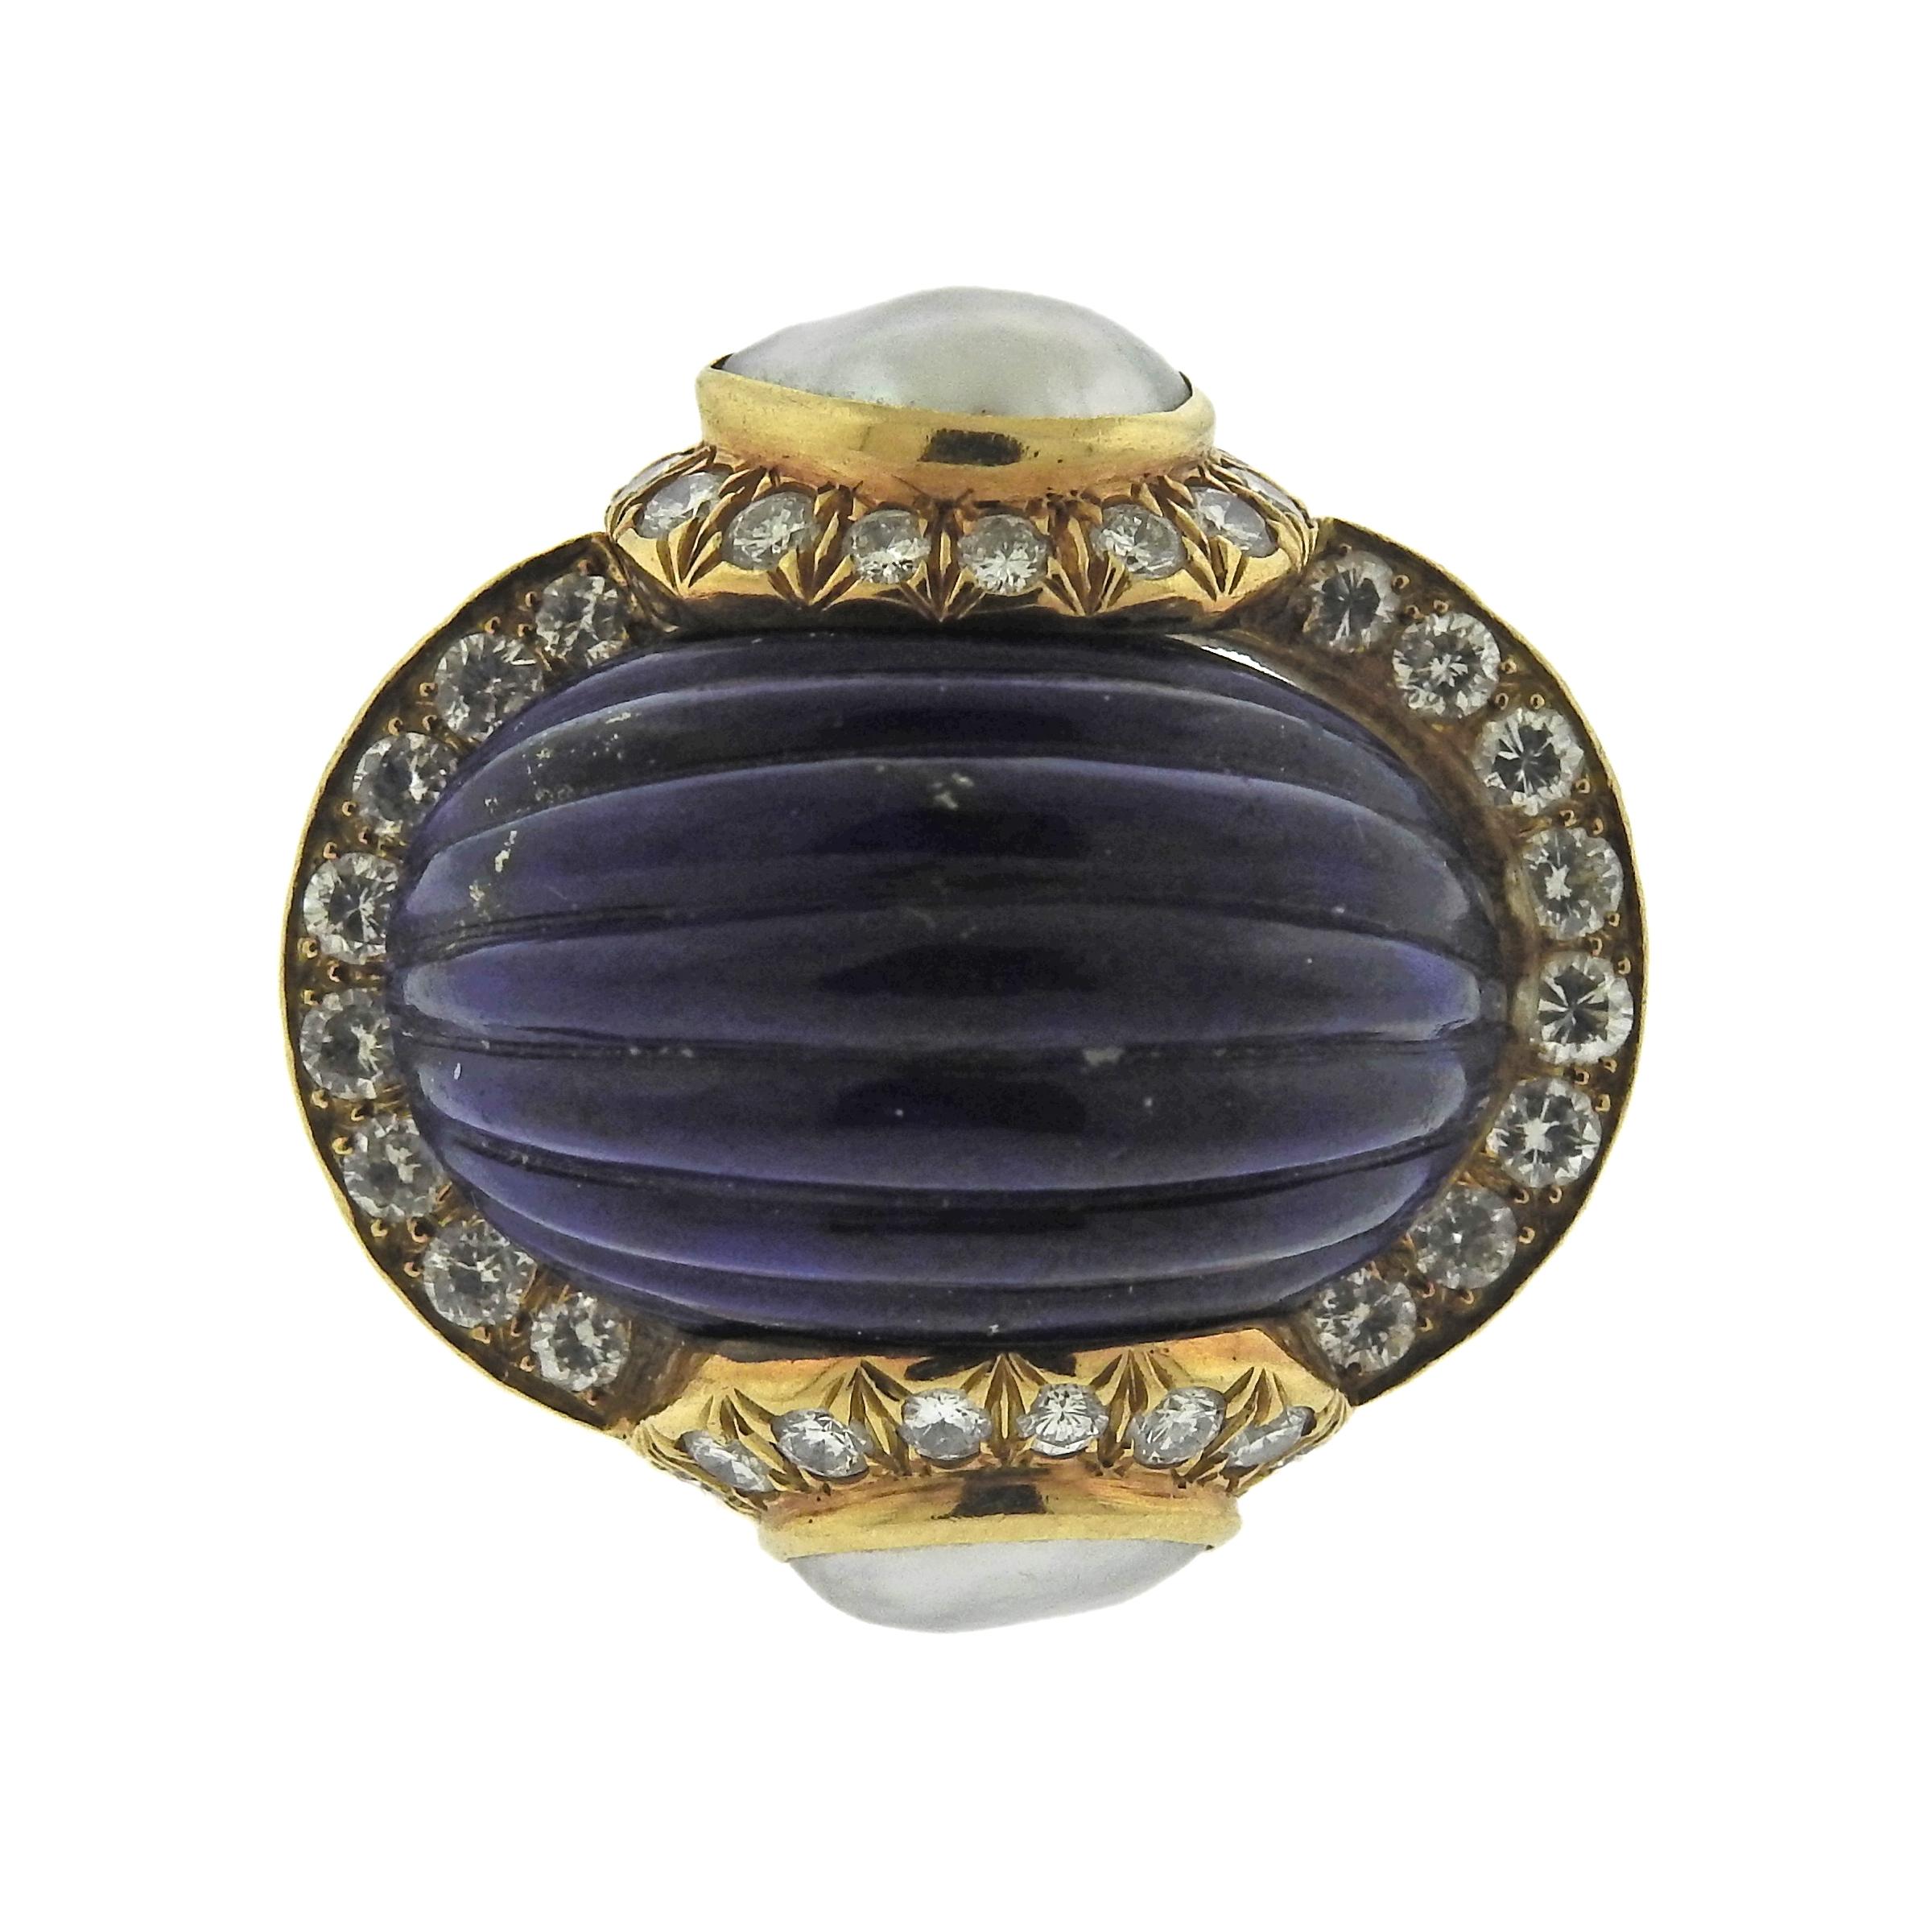 Impressive large 18k gold David Webb ring, set with carved lapis and pearls, surrounded with approximately 2.25ctw in H/VS diamonds.  Ring size - 7, ring top - 29mm x 30mm, sits approx. 22mm from top of the finger, weighs 32.7 grams. Marked 18k,